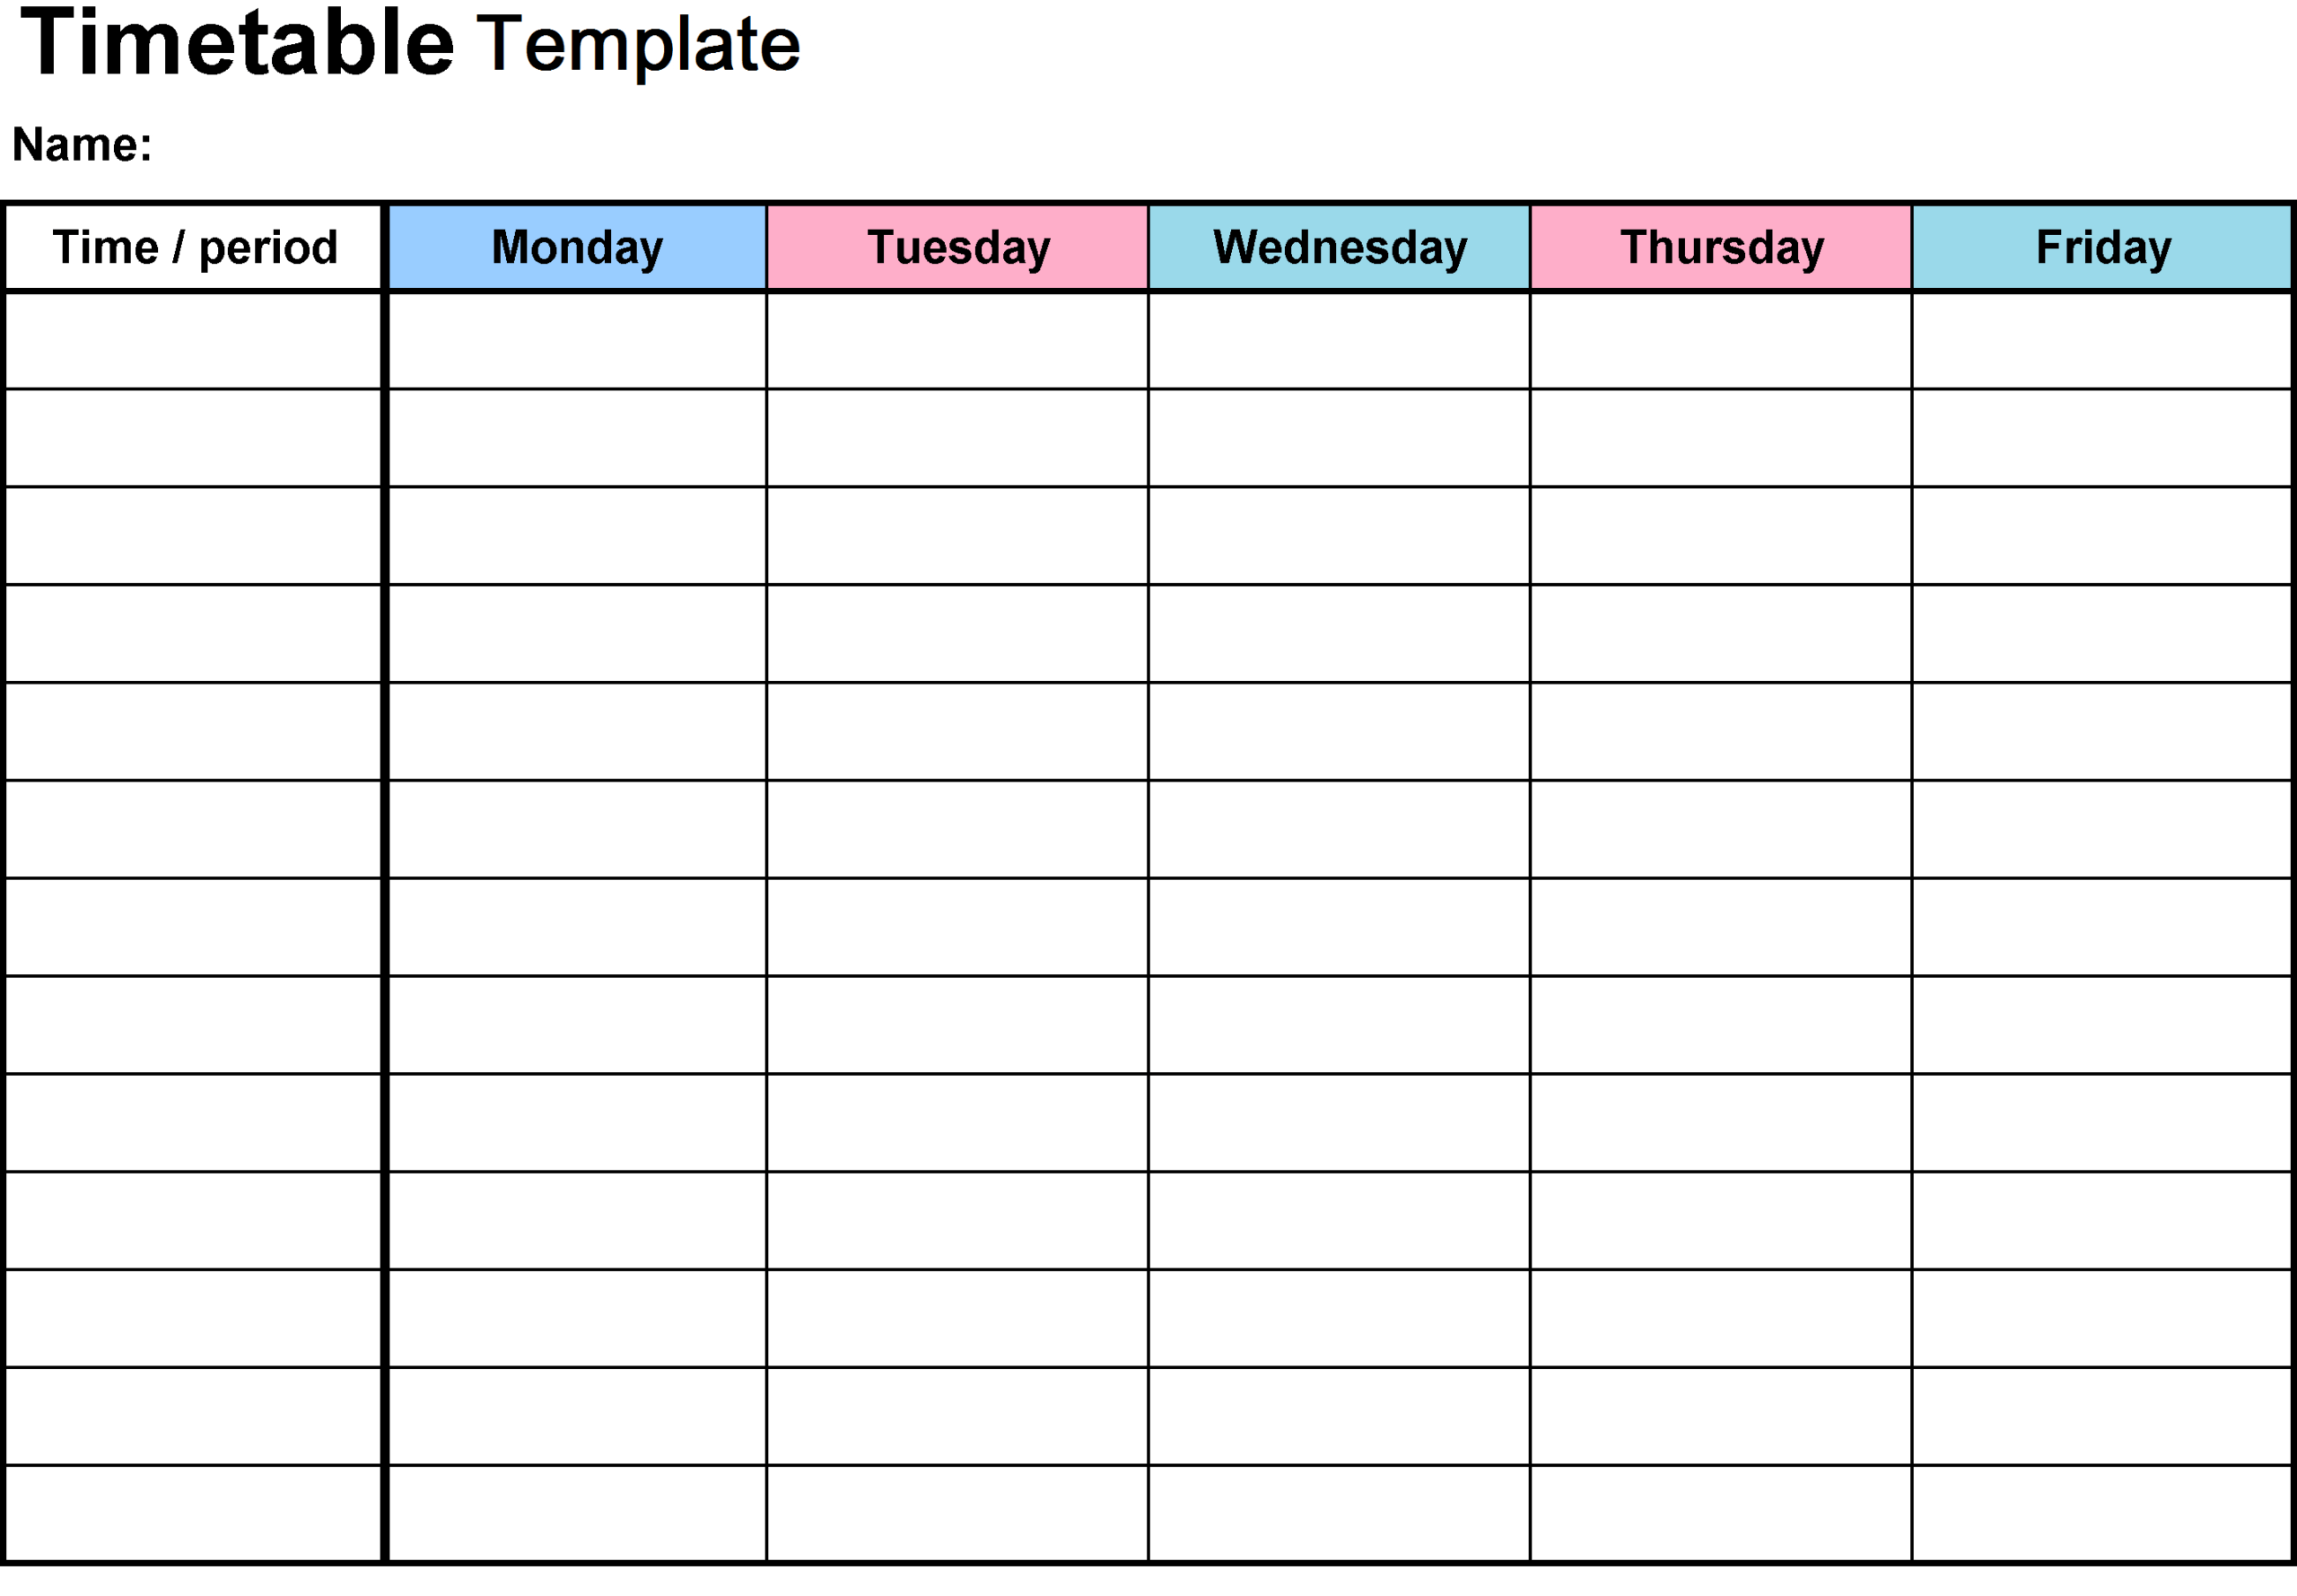 Timetable Template 2018 #collegetimetabletemplateword With Blank Revision Timetable Template